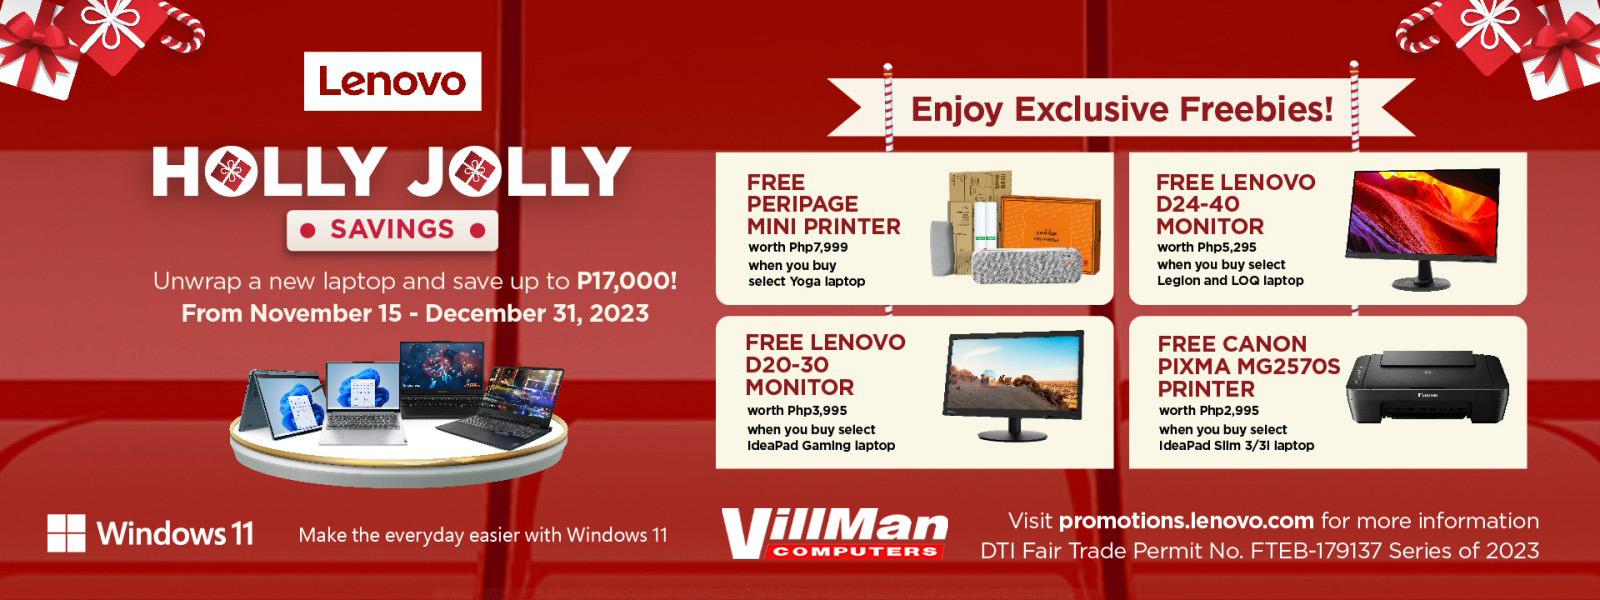 Unwrap a new Lenovo device this Christmas and get up to Php17,000! From November 15-December 31, 2023